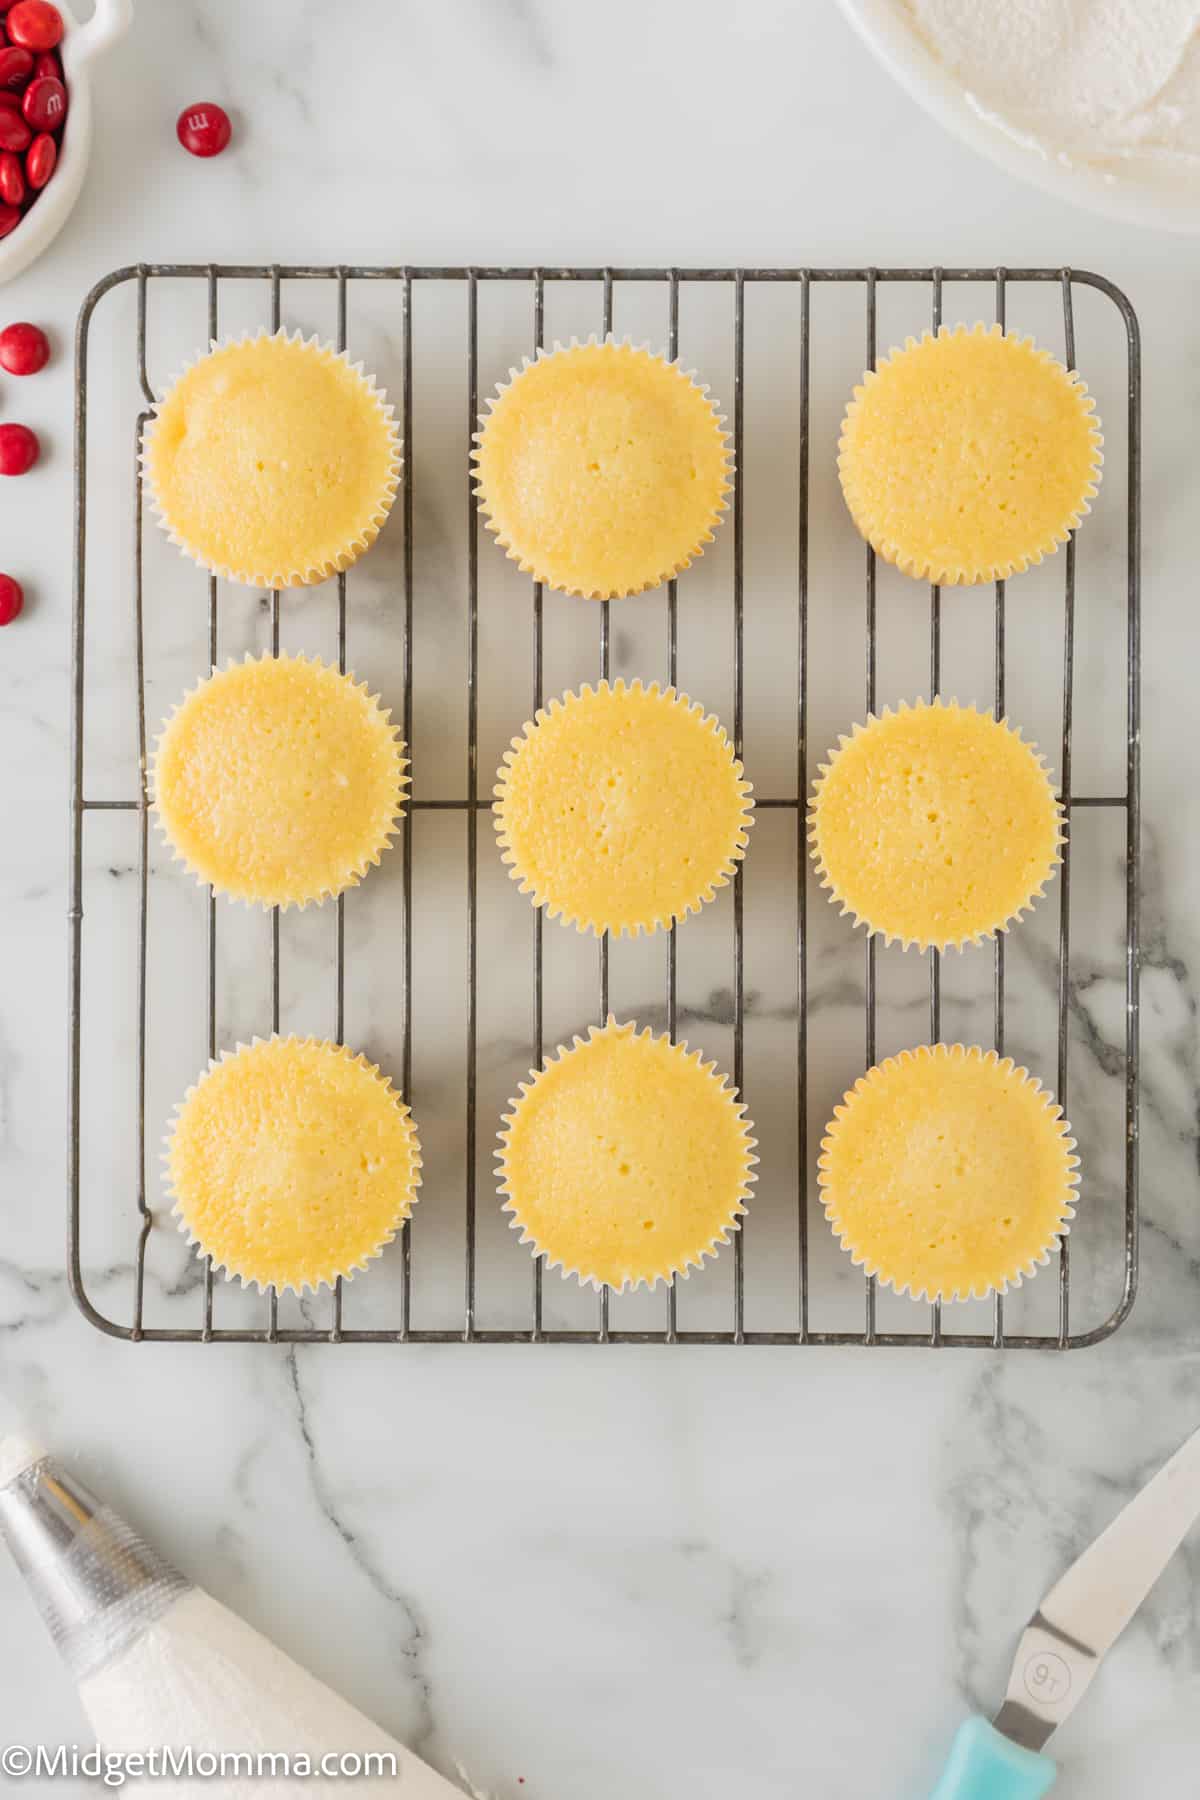 unfrosted vanilla cupcakes on a baking tray